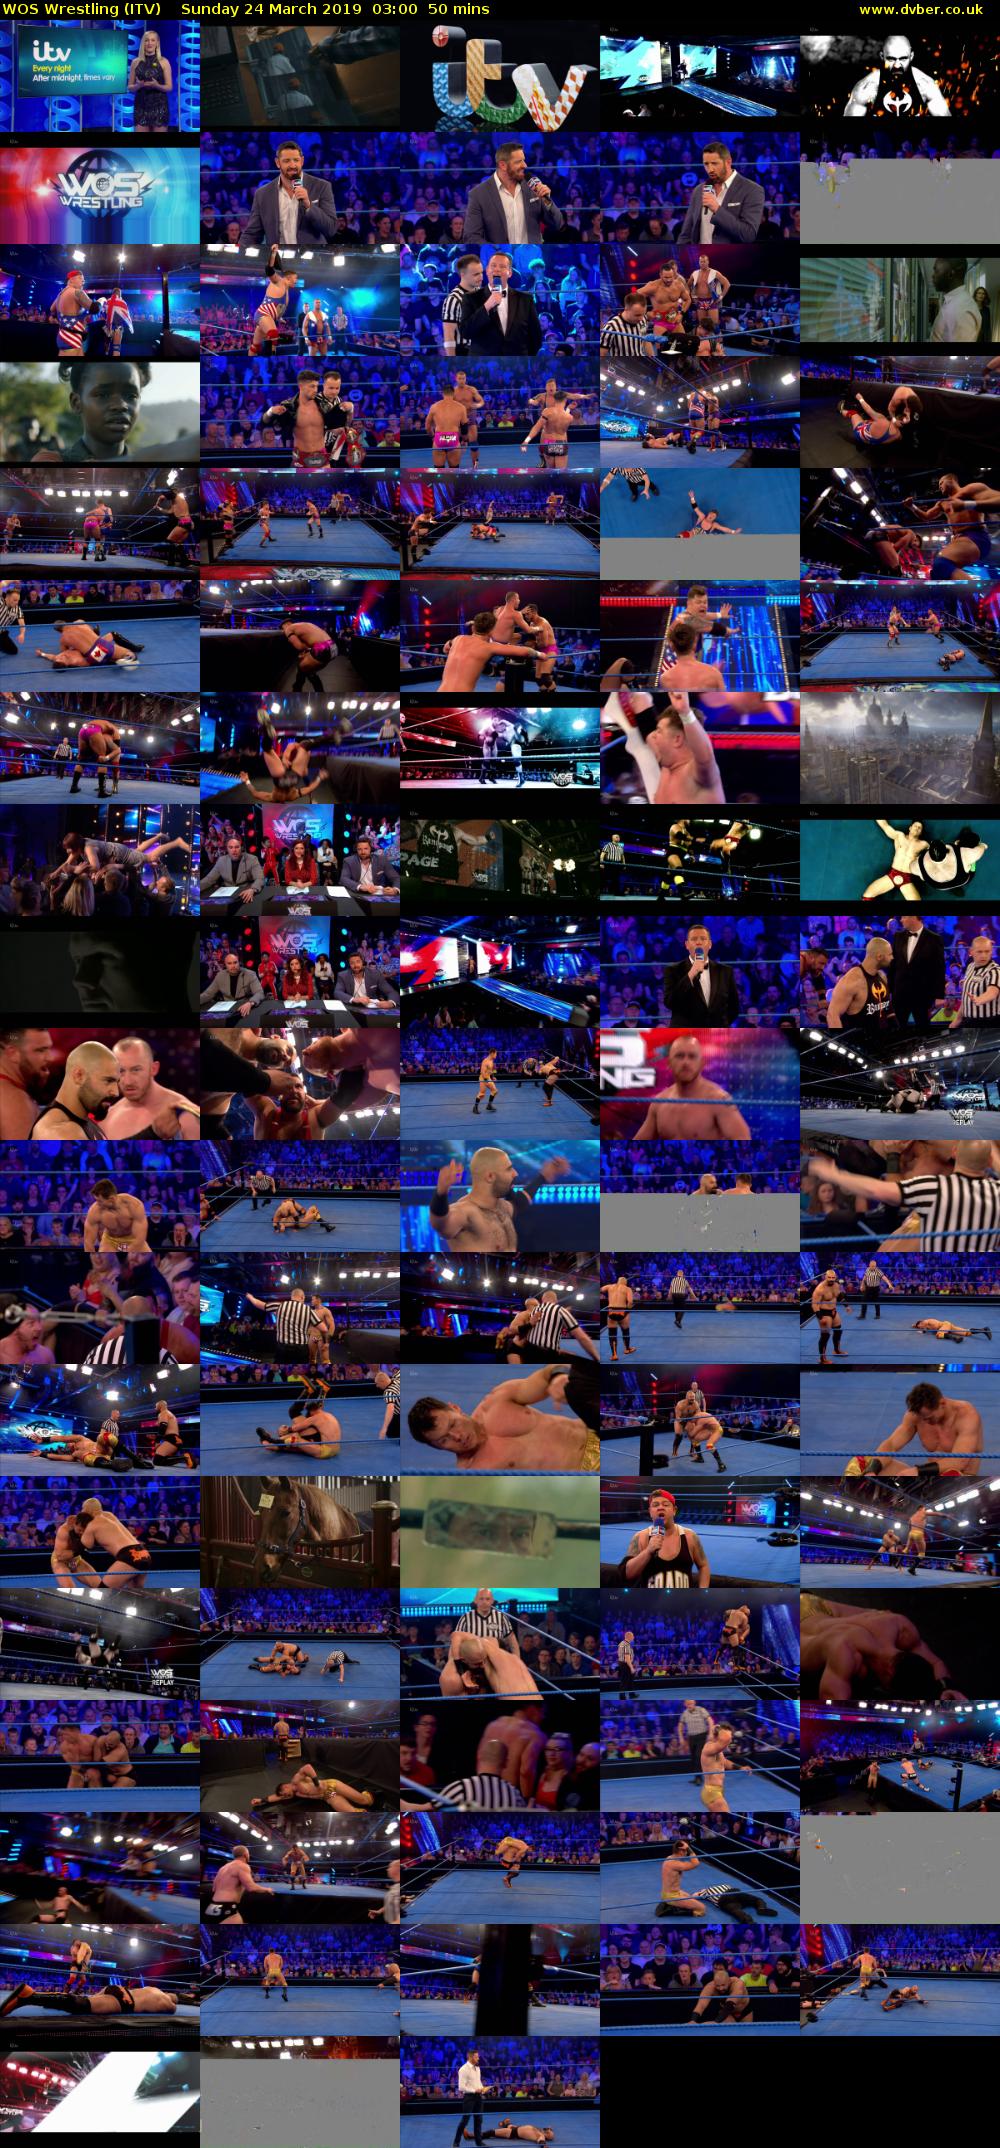 WOS Wrestling (ITV) Sunday 24 March 2019 03:00 - 03:50